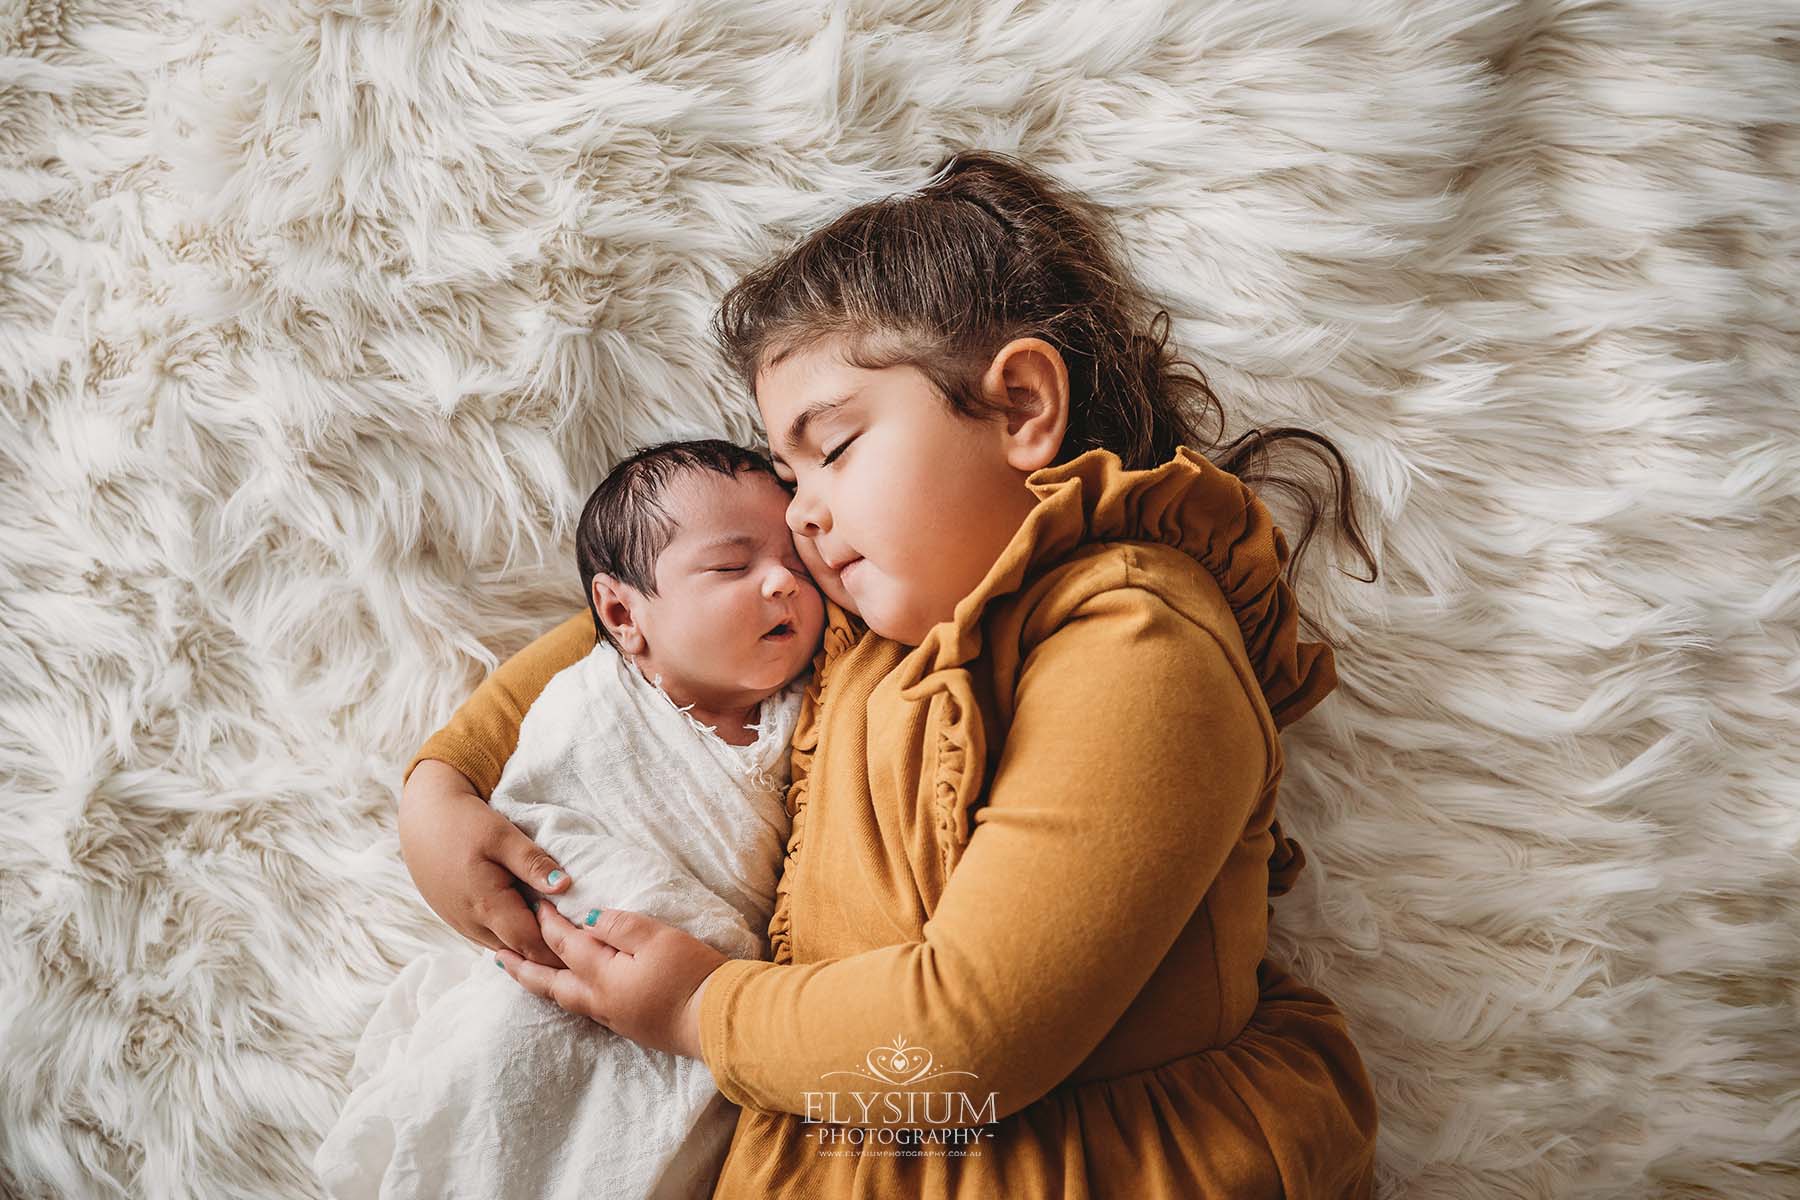 A little girl cuddles her newborn baby sister on a white rug